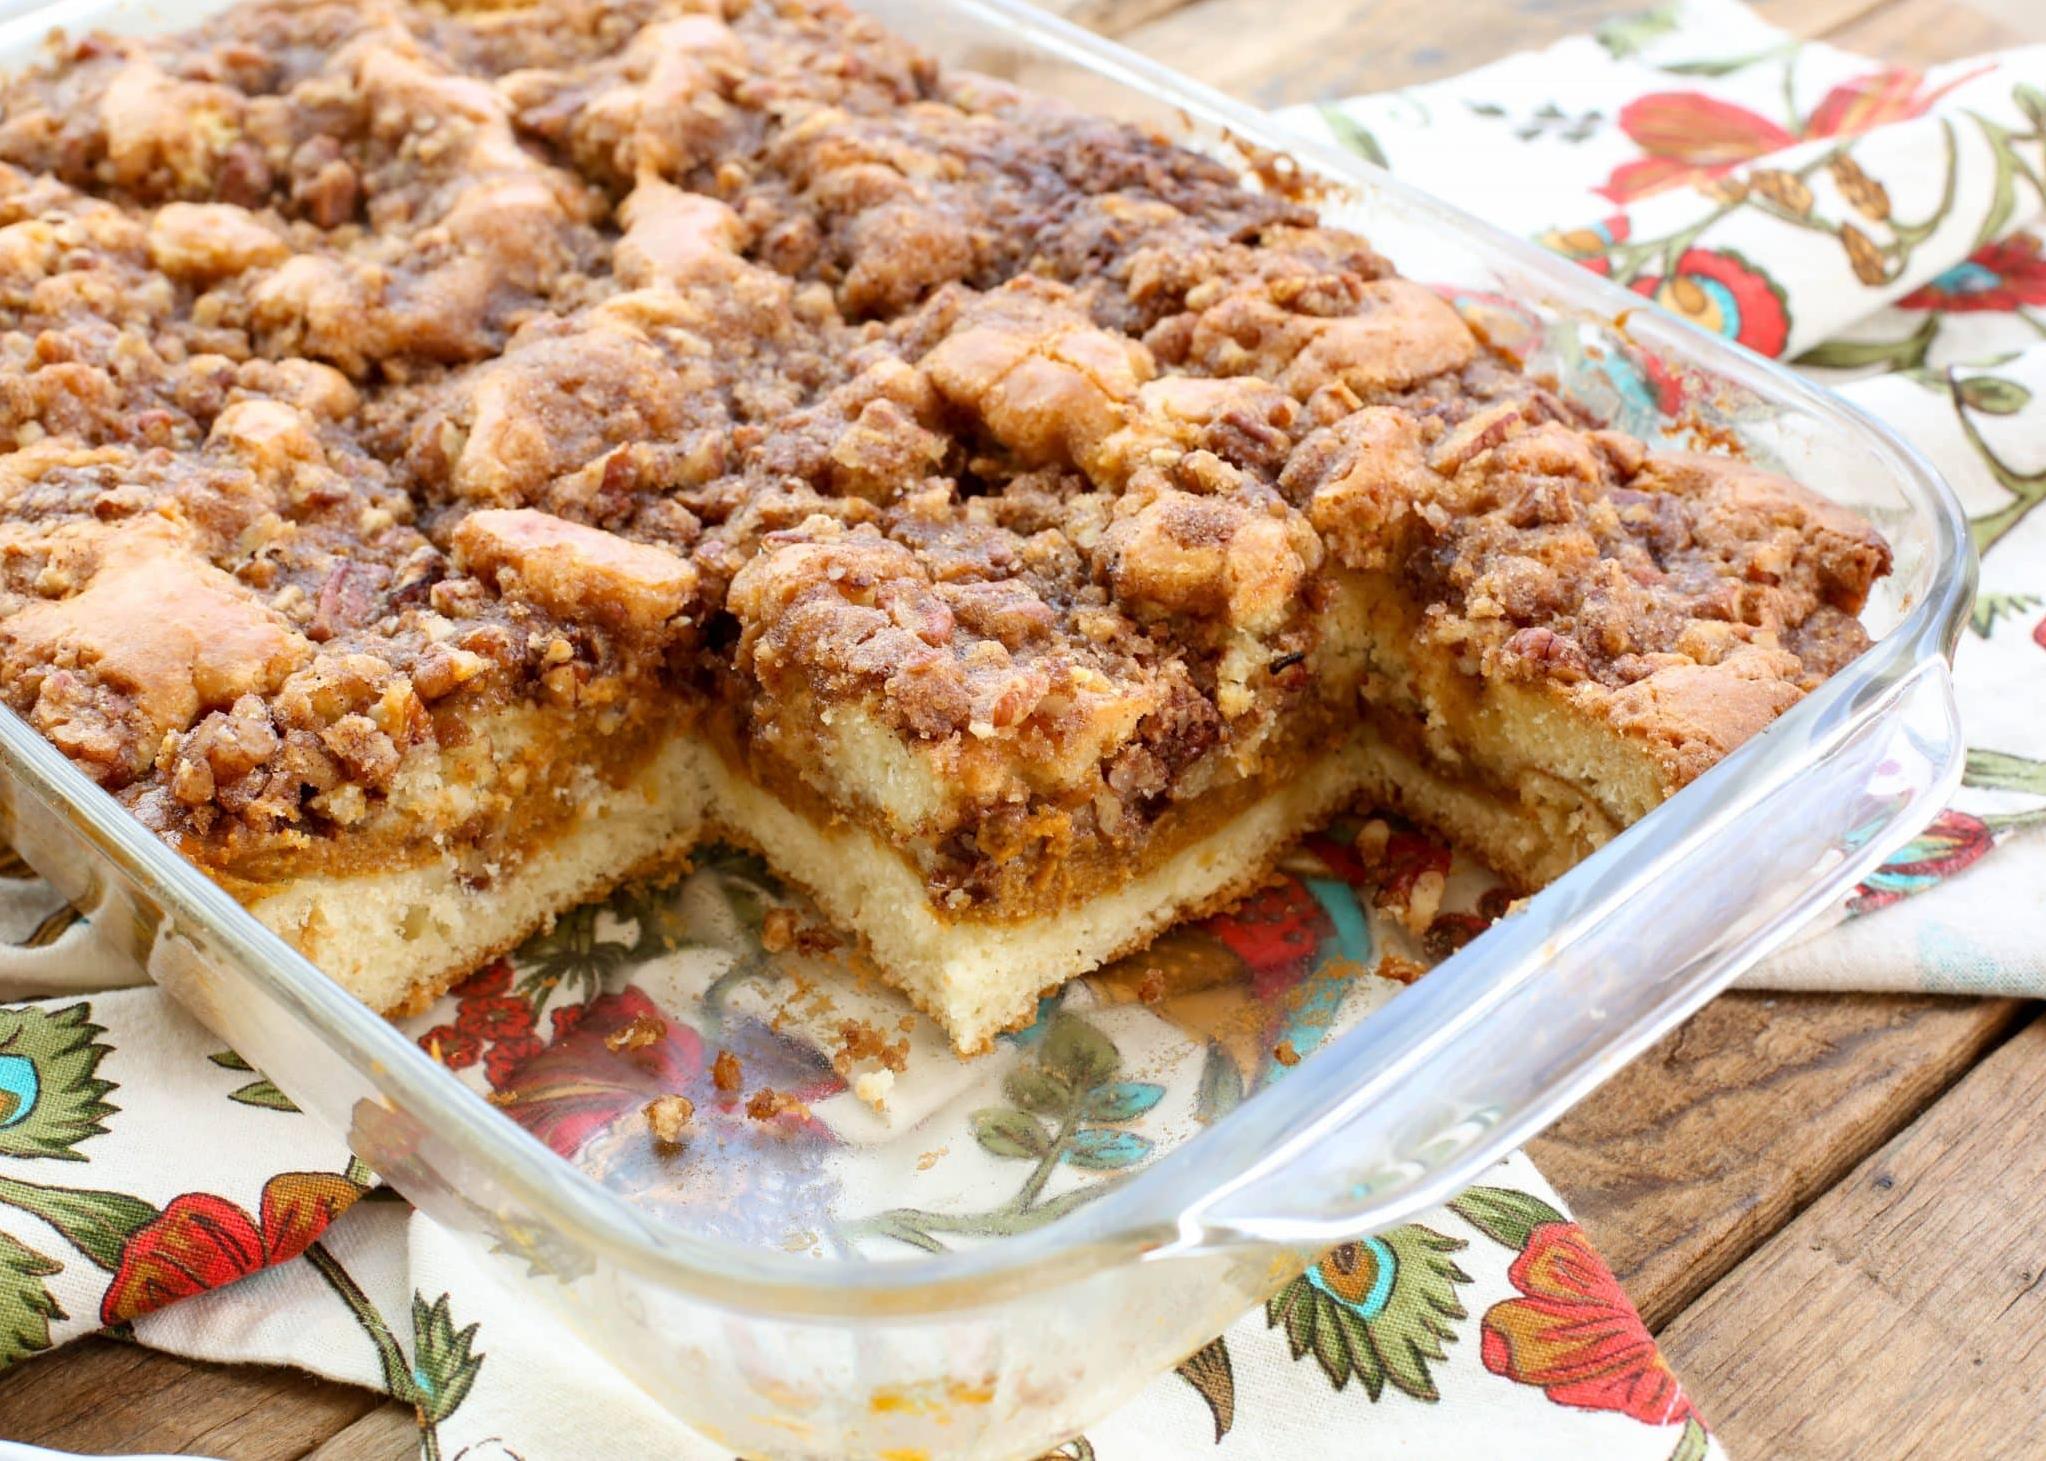  Get your caffeine fix and satisfy your sweet tooth with this amazing pumpkin coffee cake.